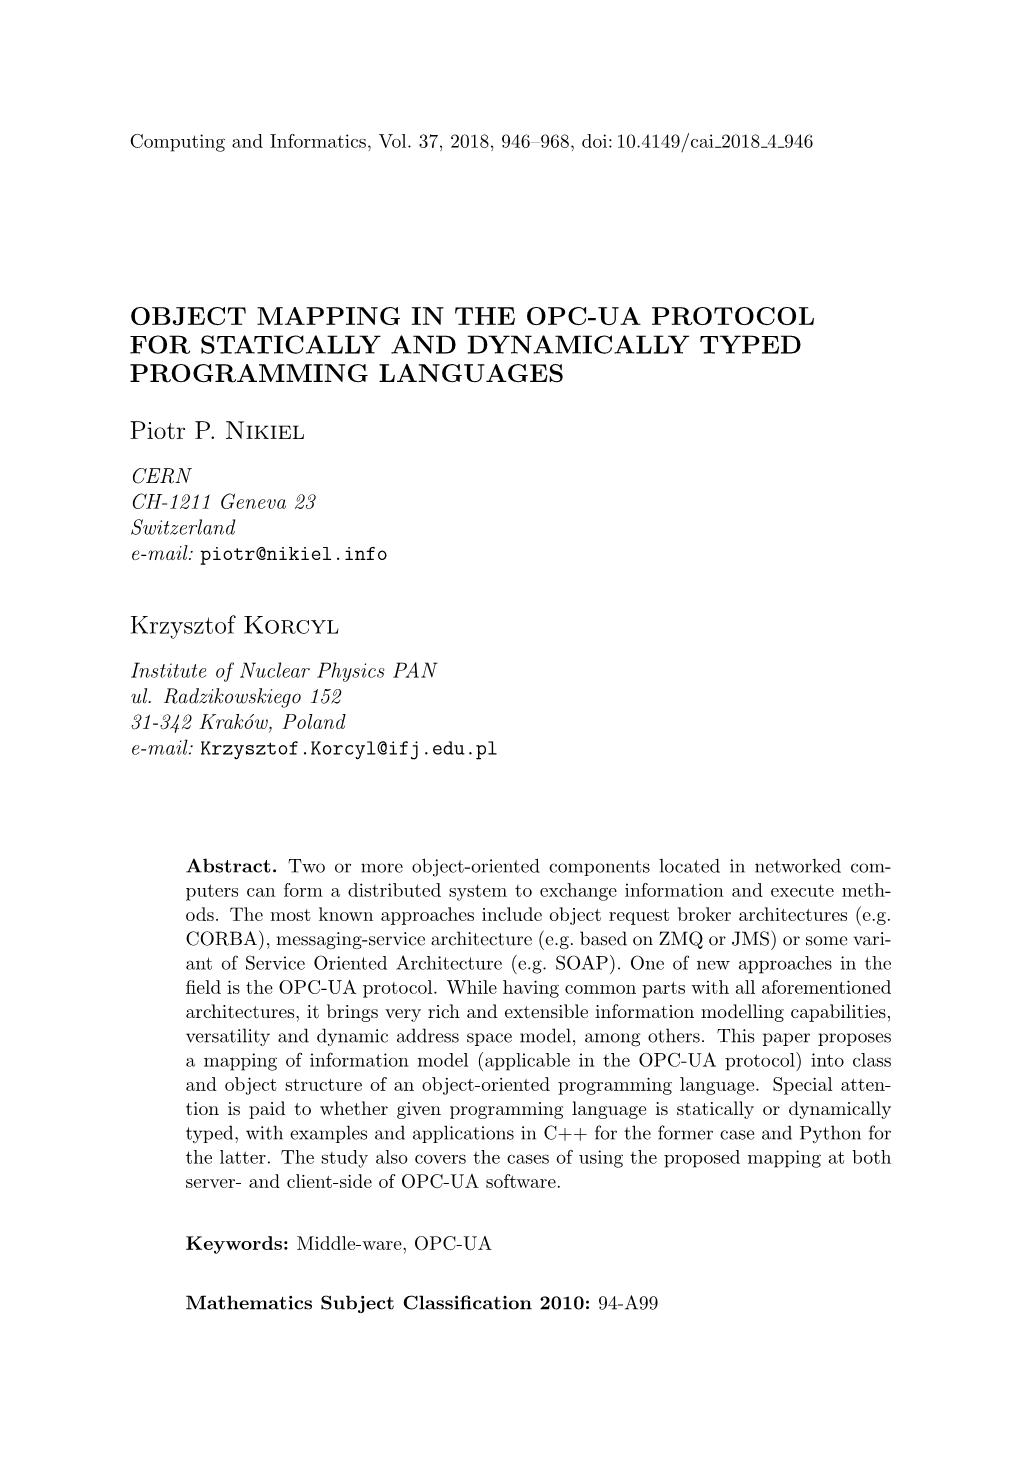 Object Mapping in the Opc-Ua Protocol for Statically and Dynamically Typed Programming Languages